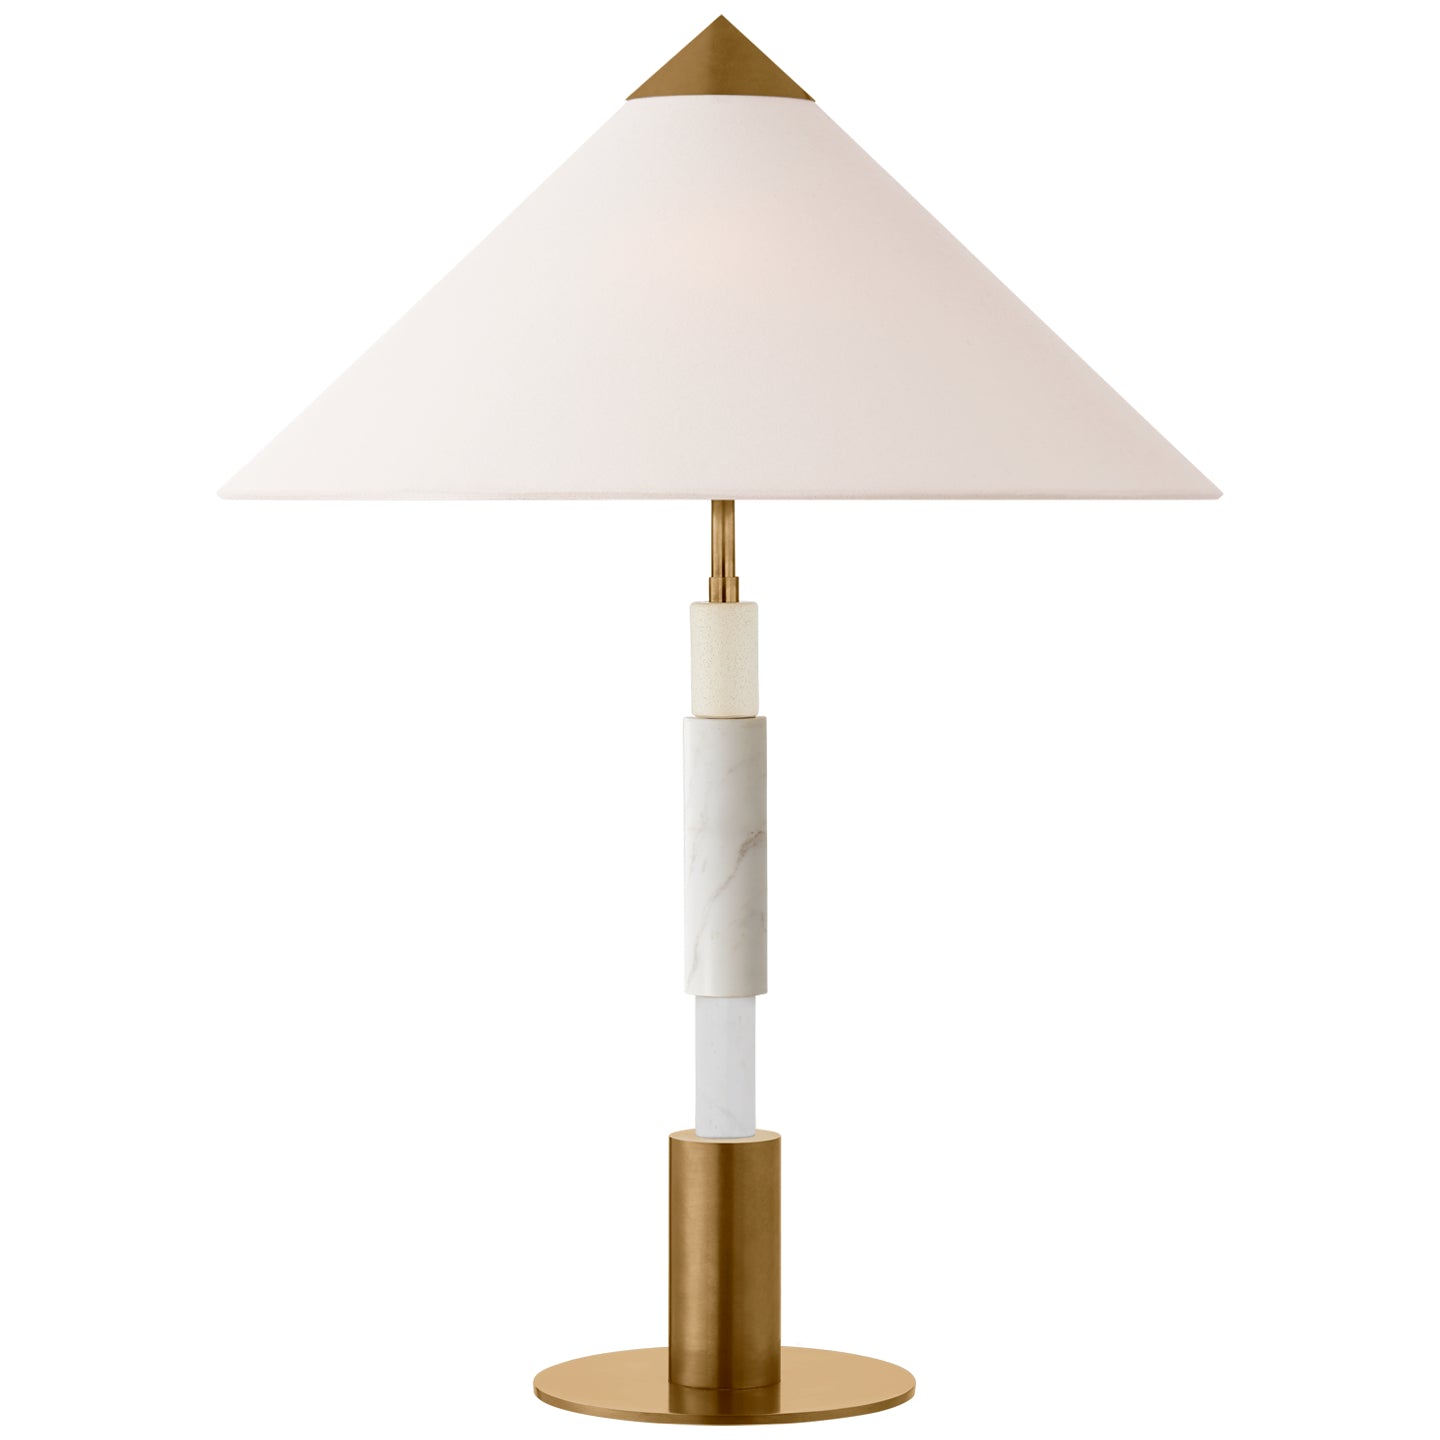 Visual Comfort Signature - KW 3607AB/WM-L - LED Table Lamp - Mira - Antique-Burnished Brass and White Marble